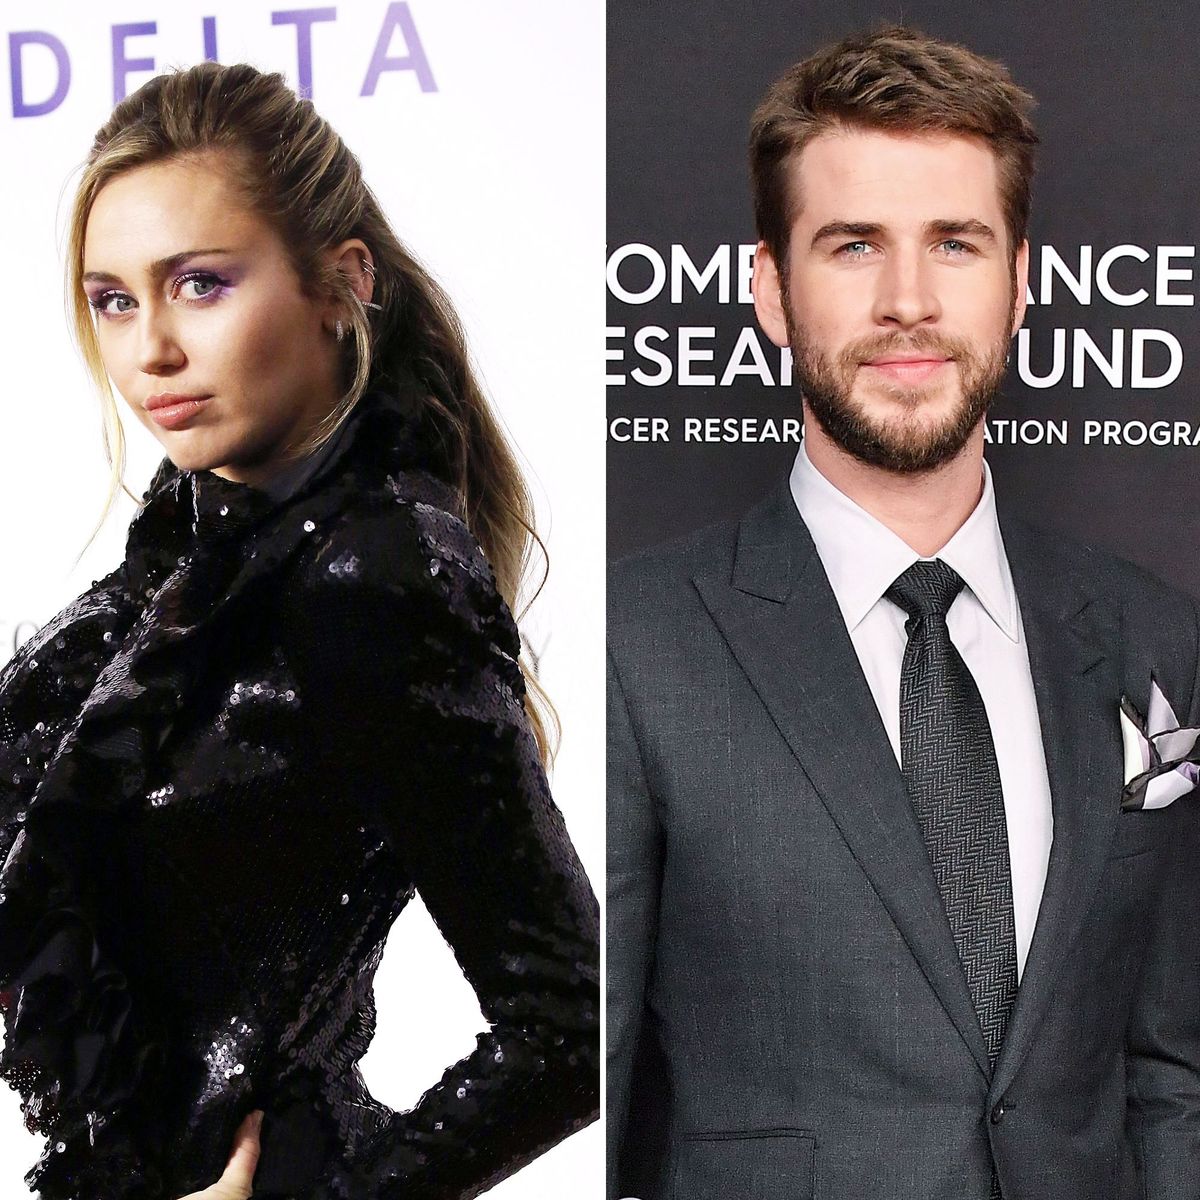 Miley-Cyrus-Reveals-She-Wrote-Liam-Hemsworth-Breakup-Song-Slide-Away-2-Months-After-Their-Wedding